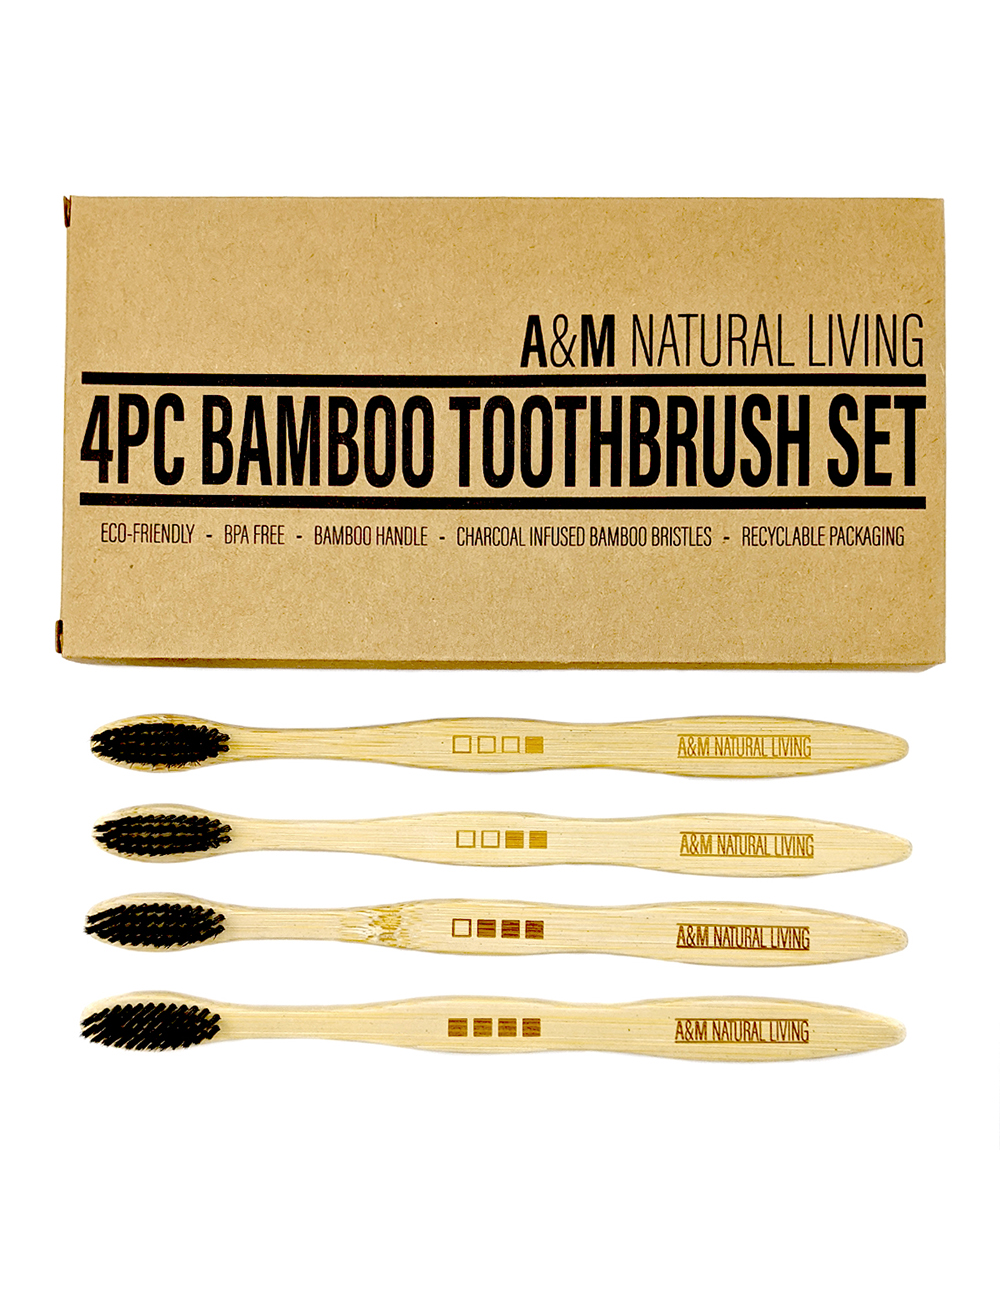 A&M Natural Living Bamboo Wooden Toothbrush Toothbrushes Charcoal Bristles Set